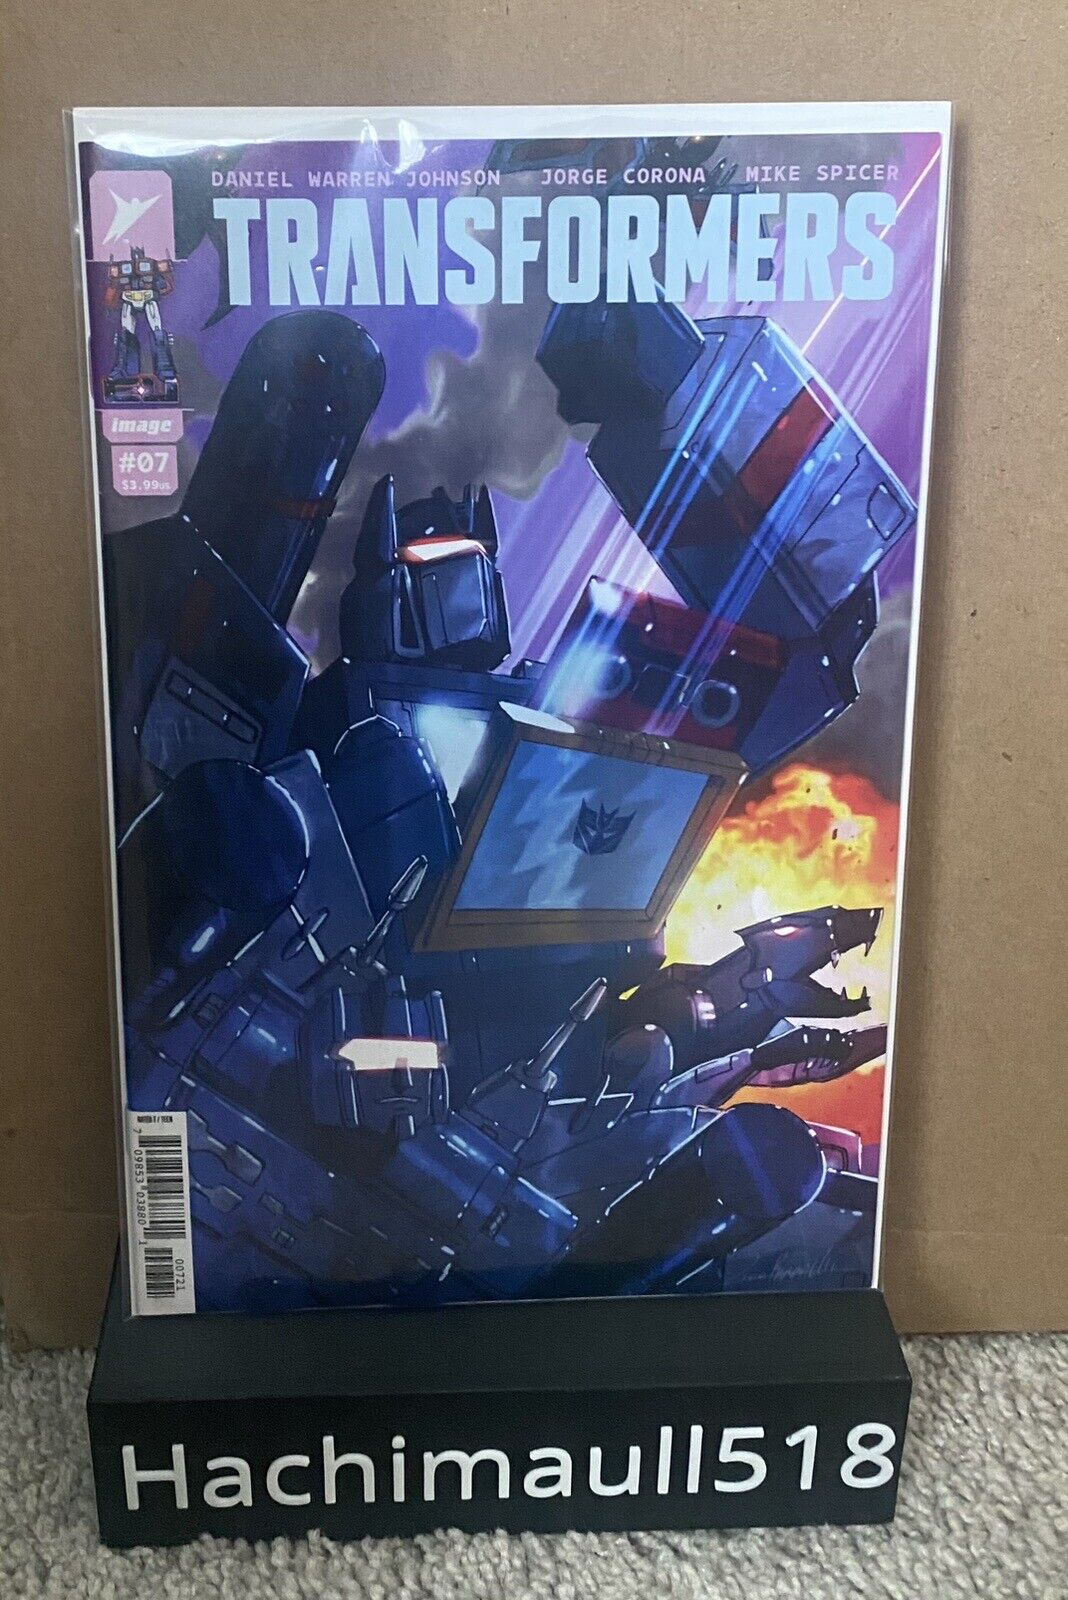 Transformers 7 Livio Ramondelli Trade This Cover Wasn’t Sold Can Only Get Here